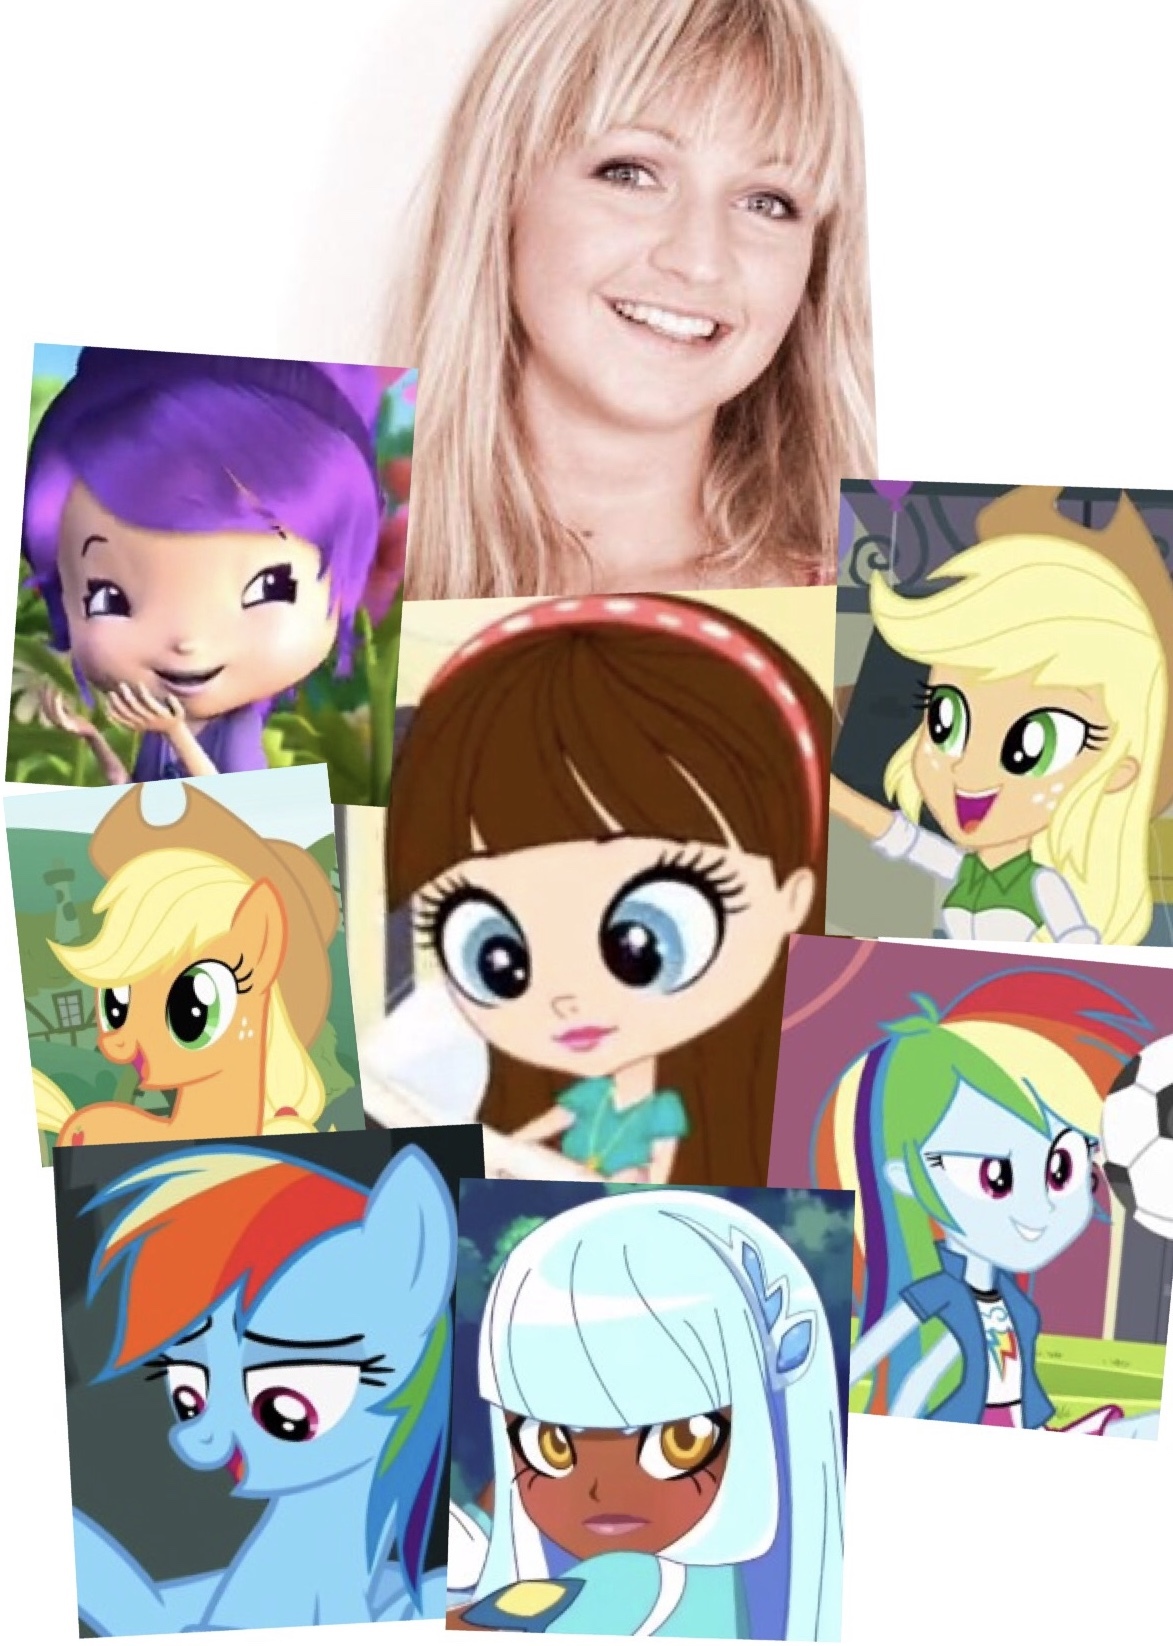 girl who voices applejack